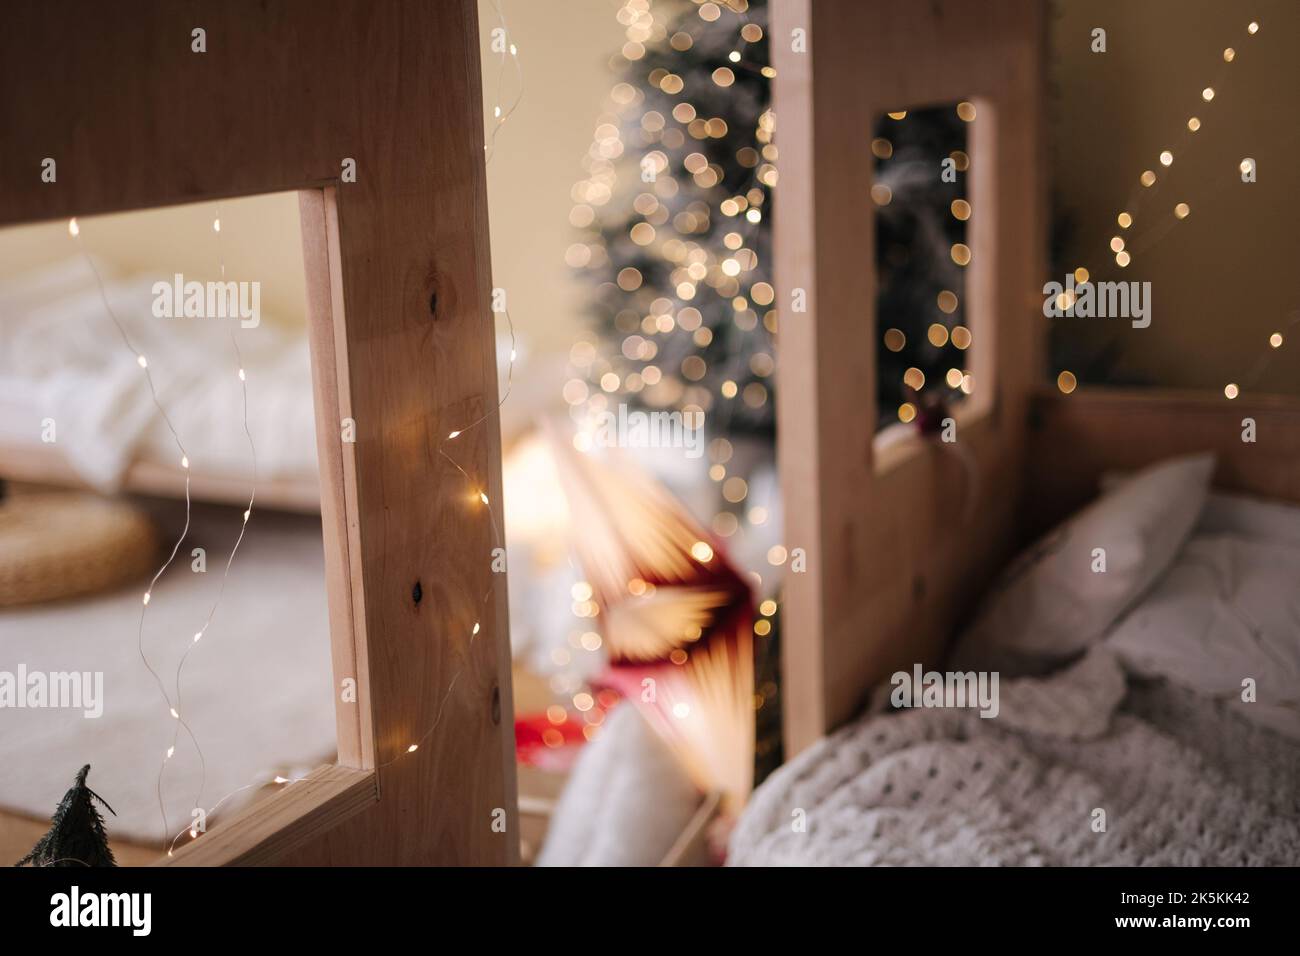 Children room with Christmas decorations. Presents in red festive packaging. Interior design for kids. Background of christmas tree lights. Stock Photo